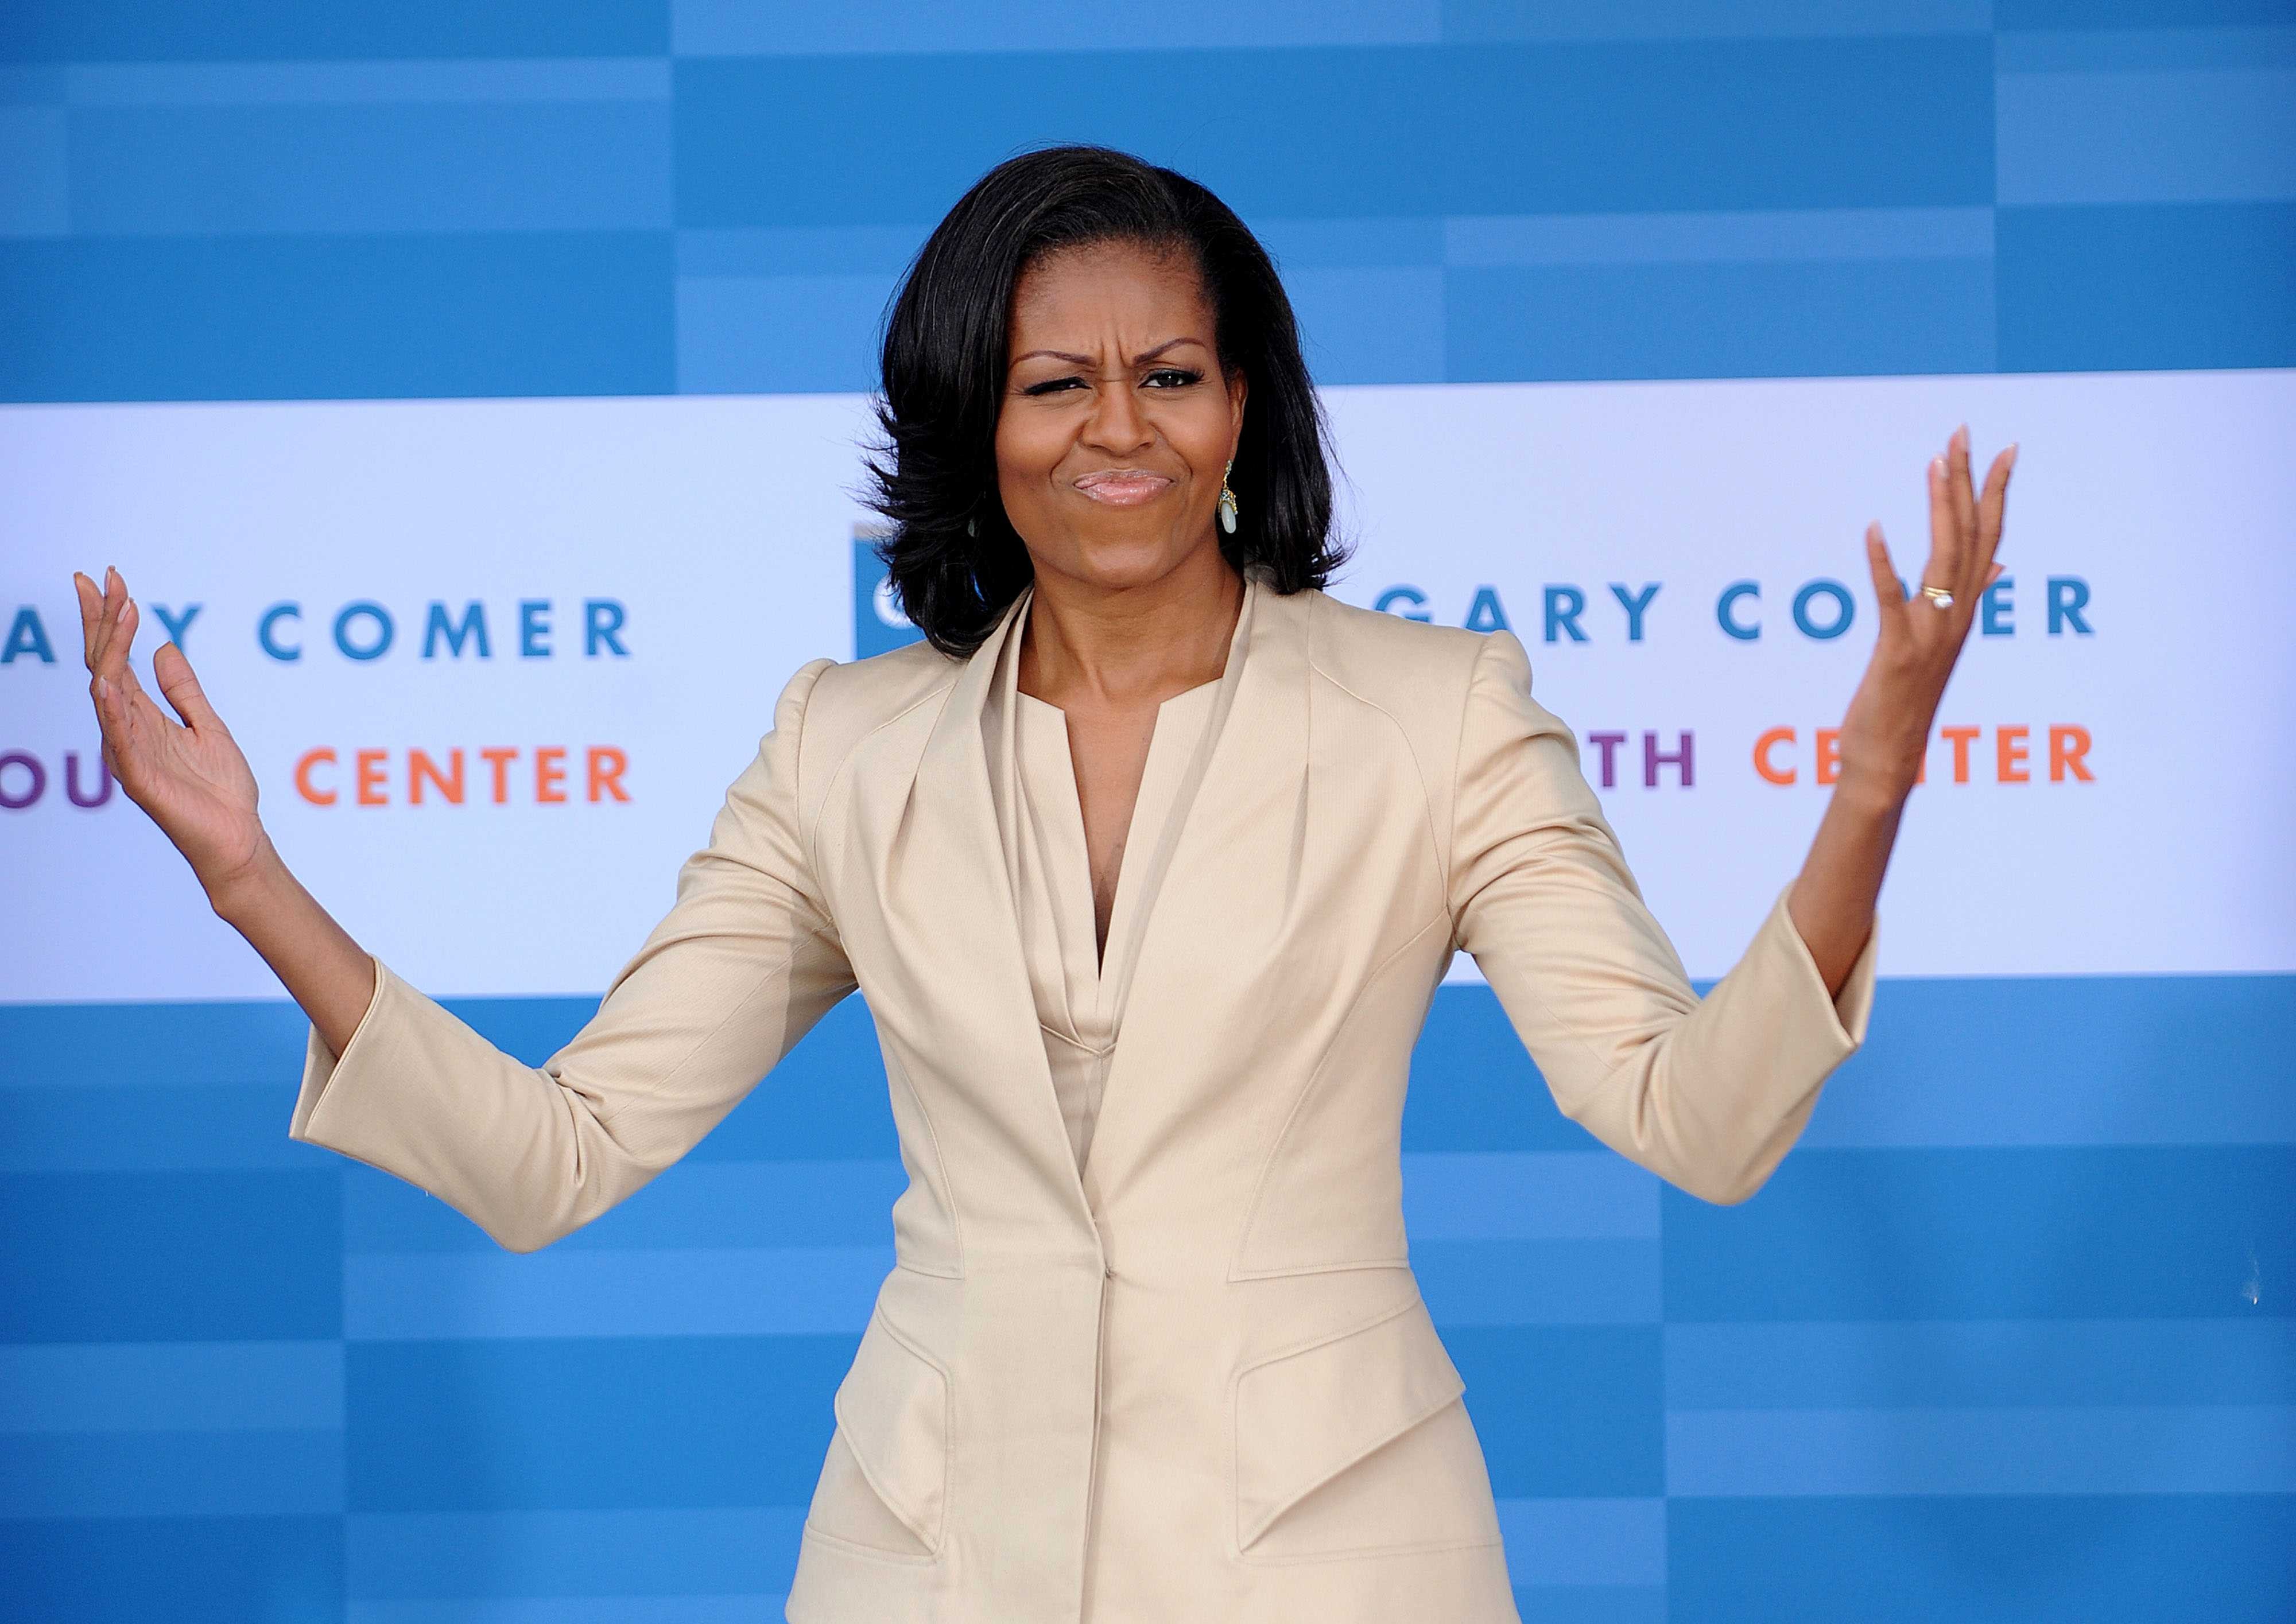 Race, religion and Michelle Obama’s arms – Gender Week takes on the big issues